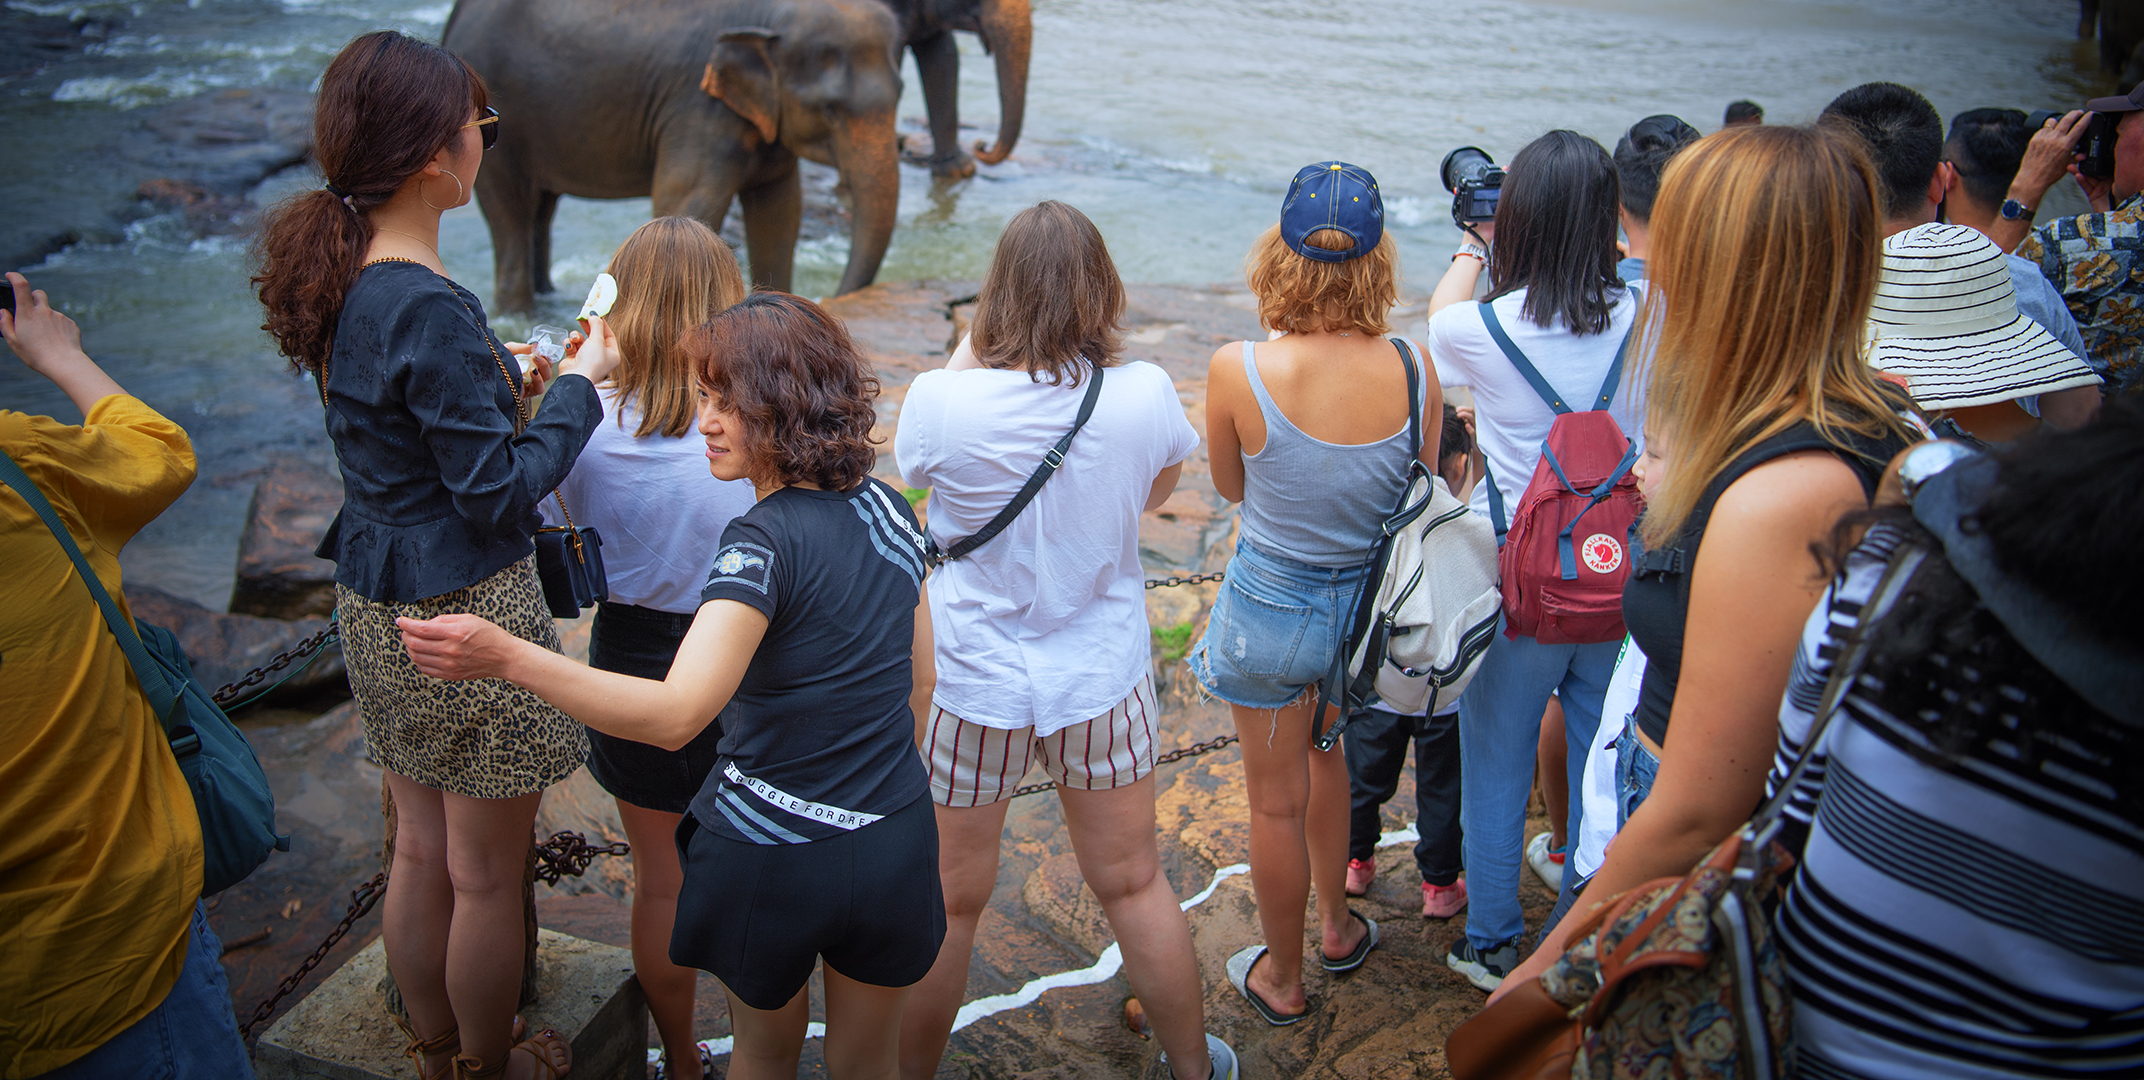 Tourists Showing Support to Promote a ‘Safe Sri Lanka’